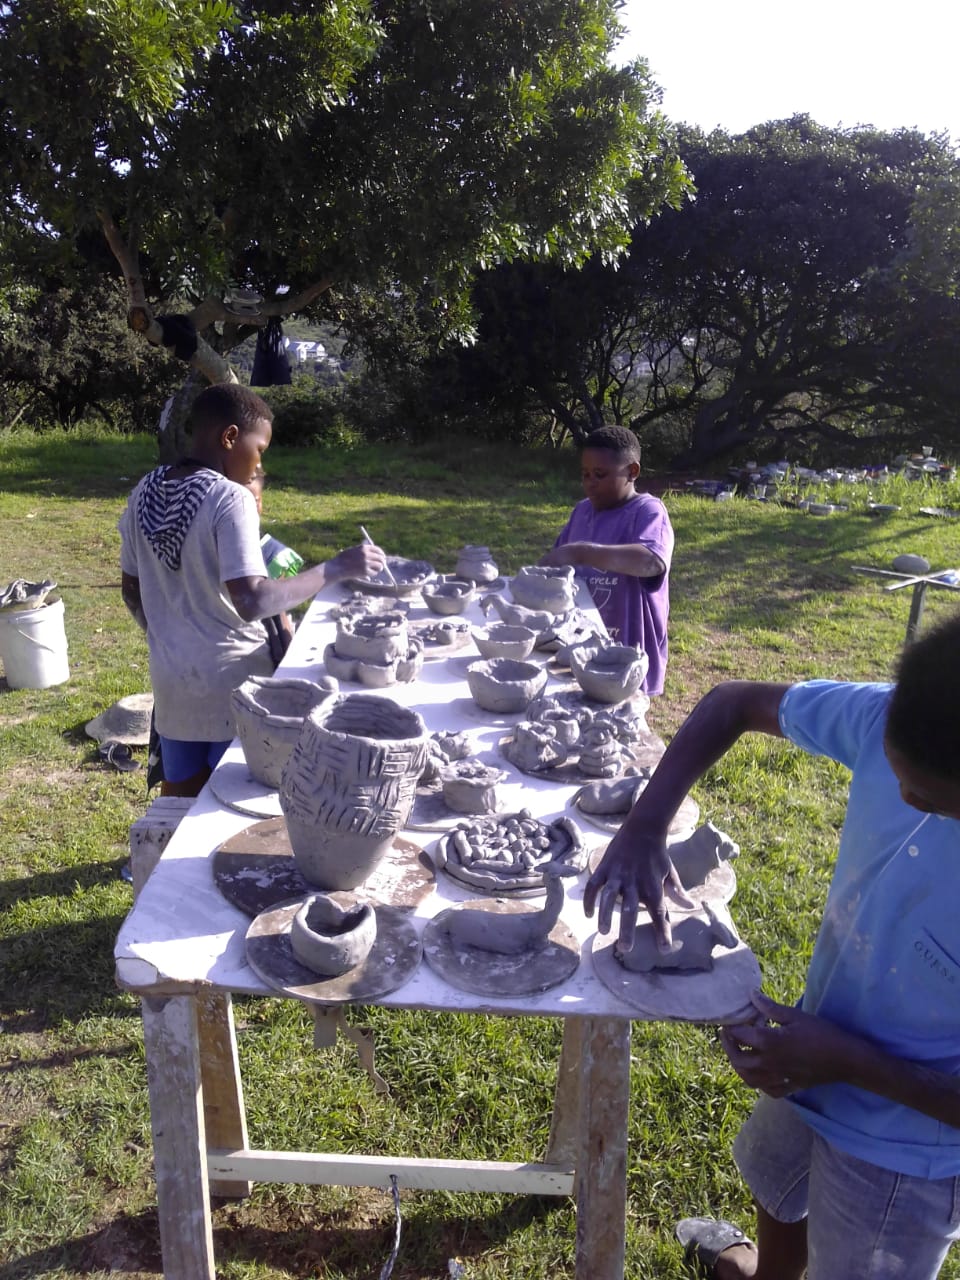 Pottery creations by Kariega Boma dancers